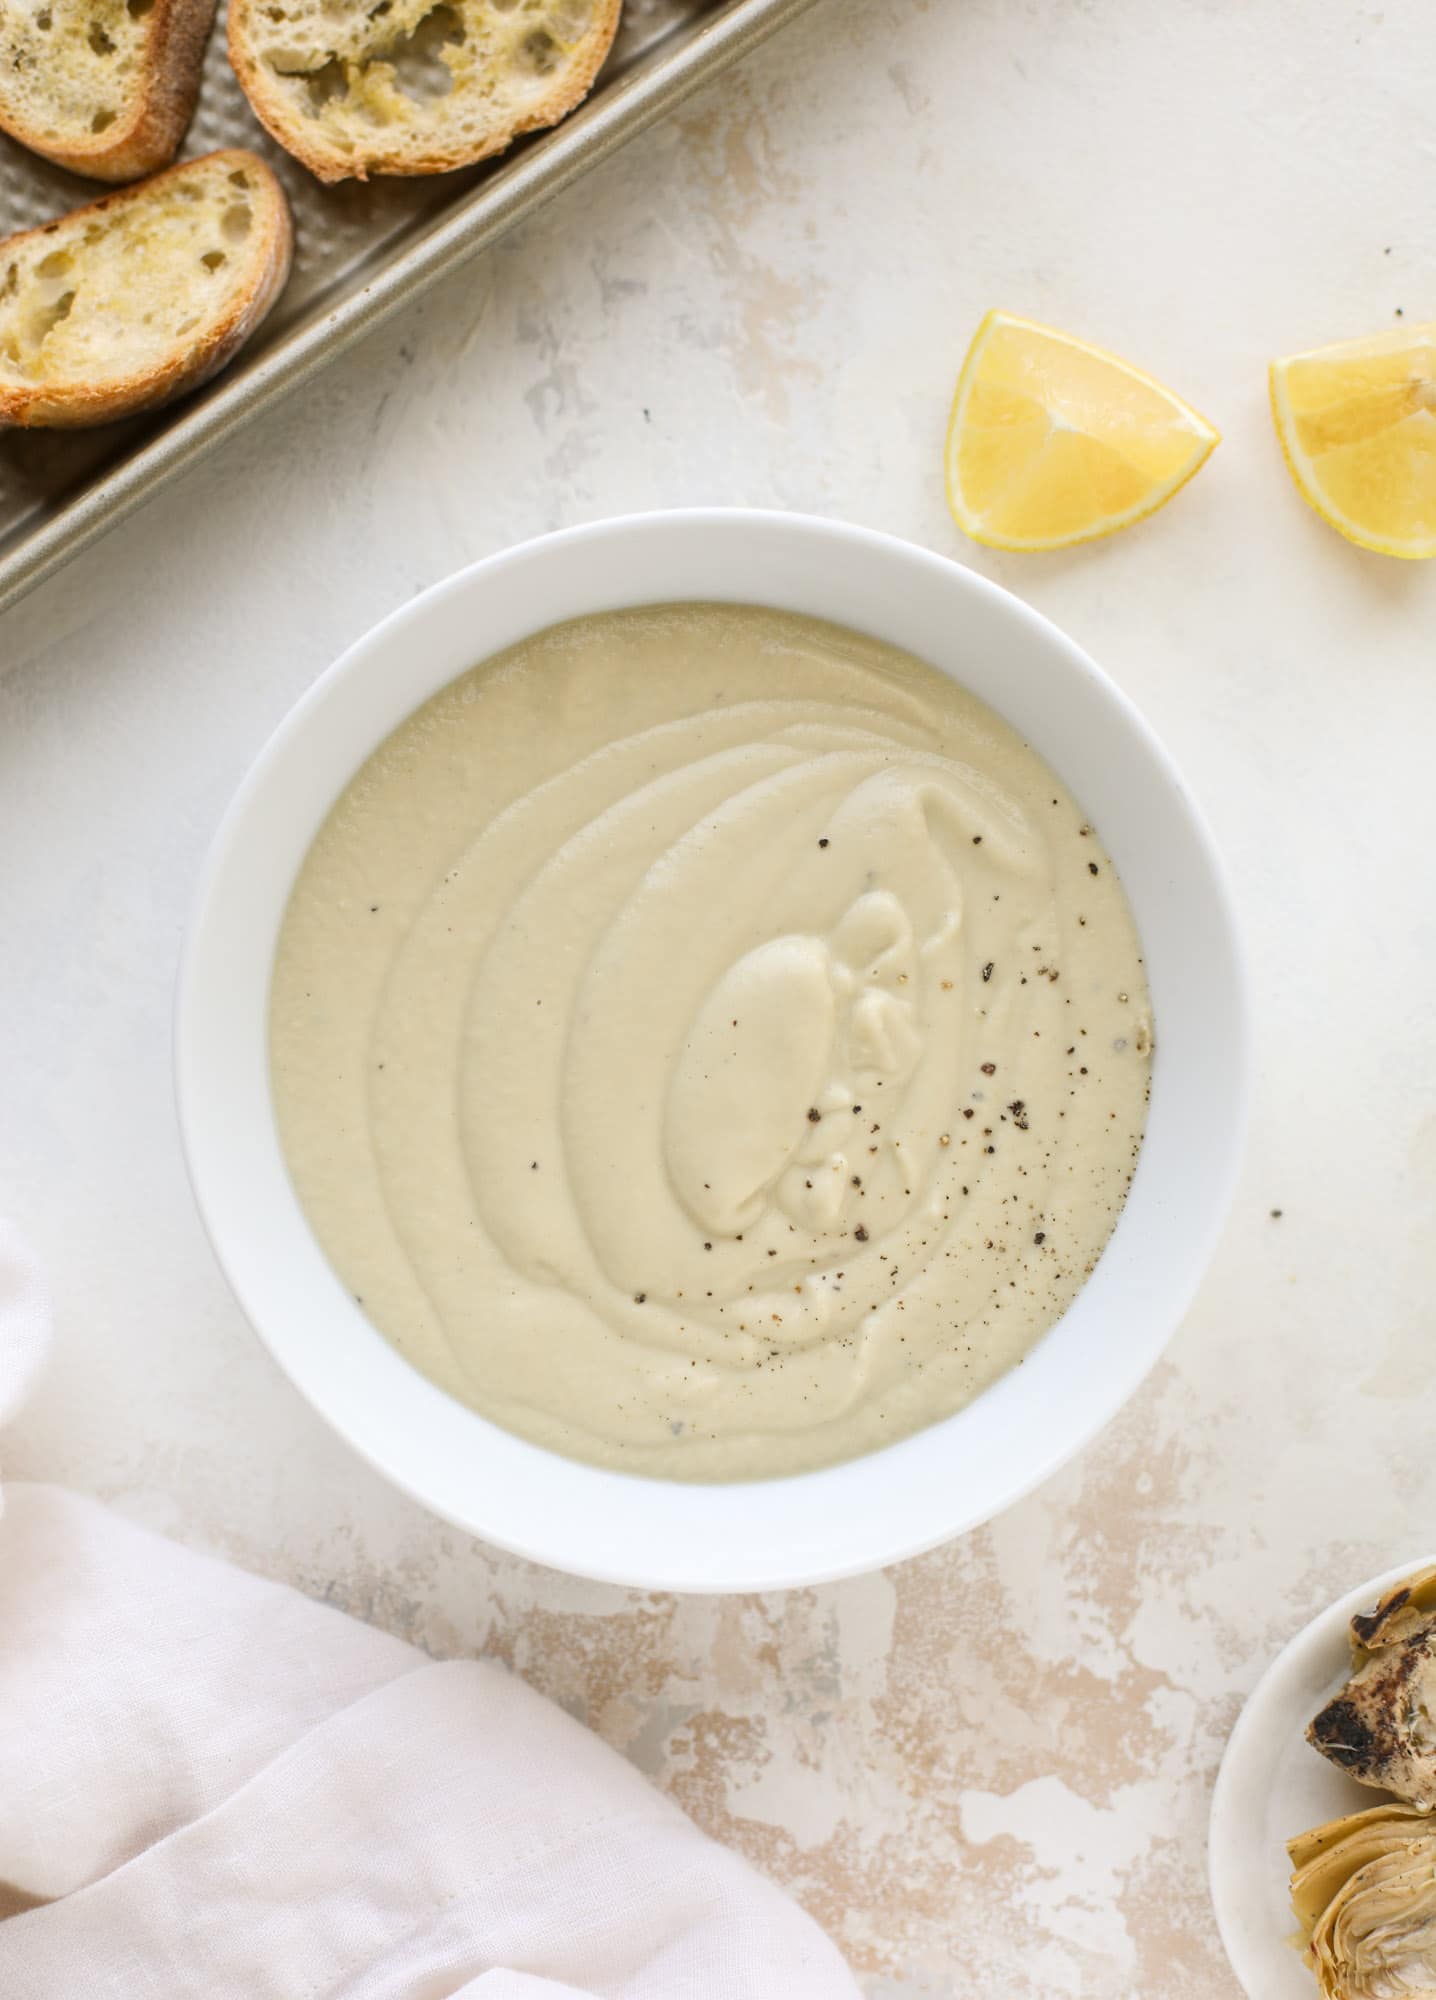  This creamy artichoke soup is full of artichoke hearts, cream and crème fraiche. It's rich and hearty but also light in flavor - perfect for late winter. I howsweeteats.com #artichoke #soup